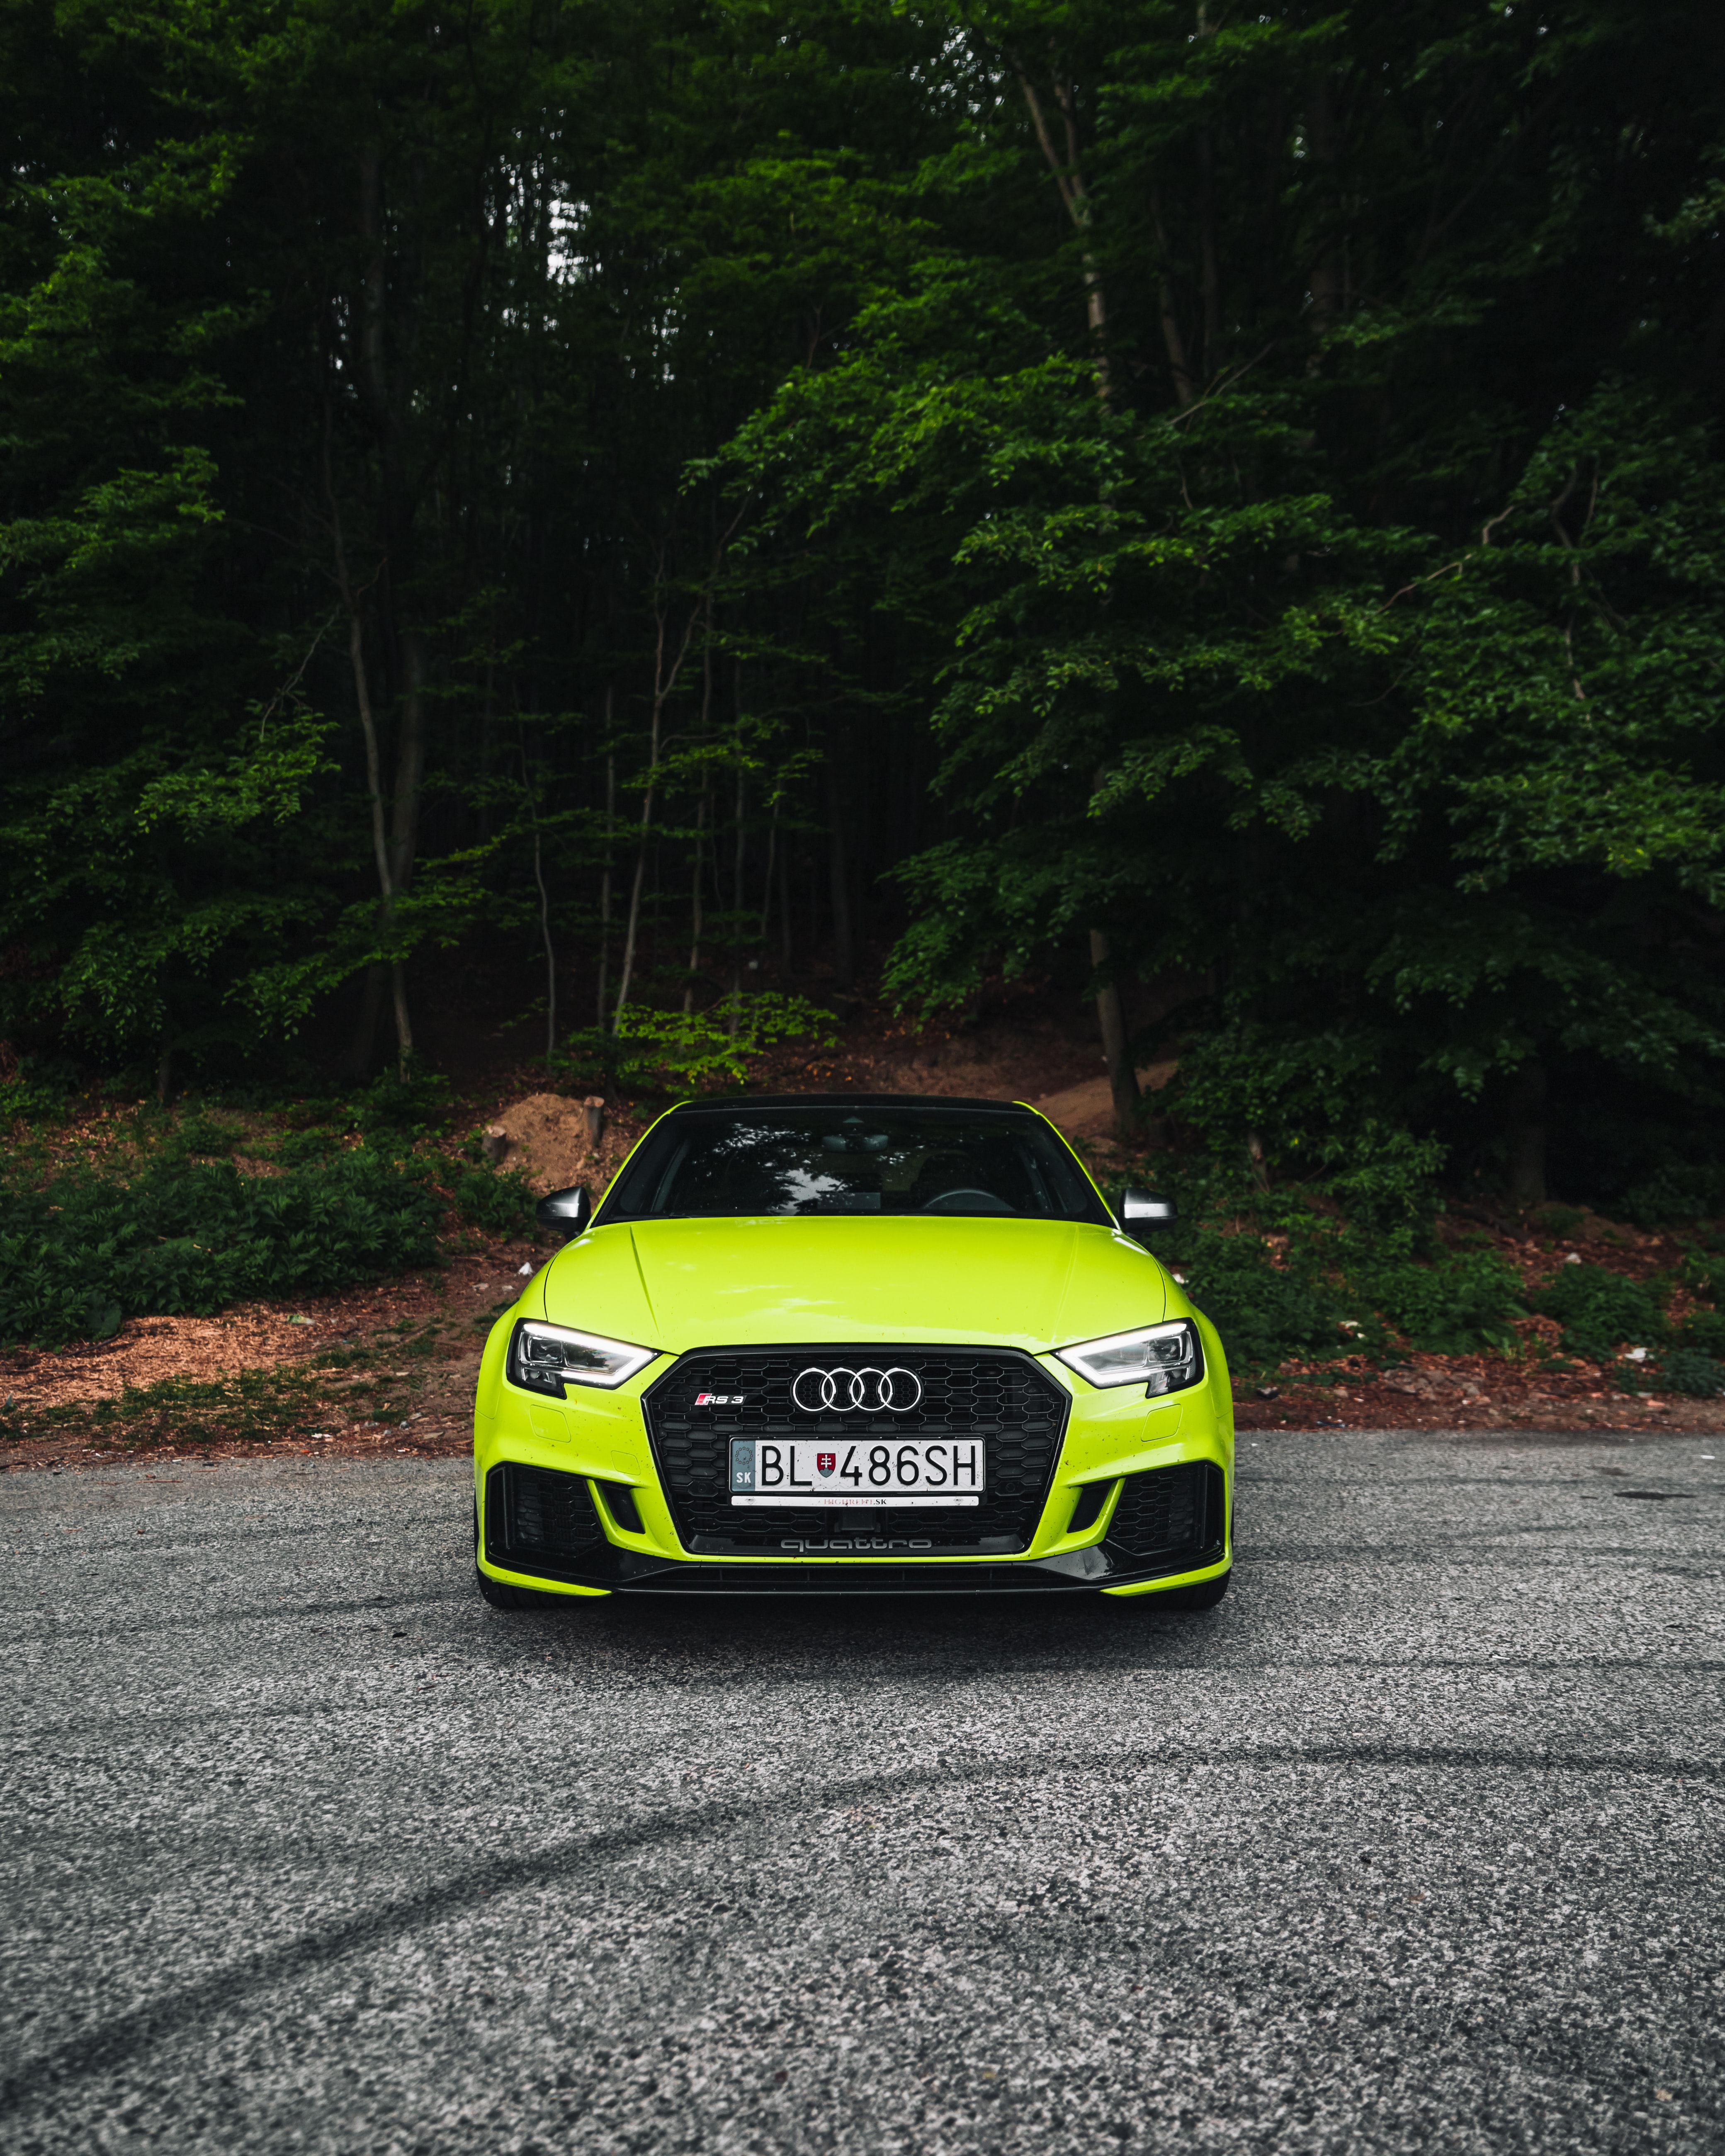 audi, cars, front view, sports car, sports, green, car, audi rs4